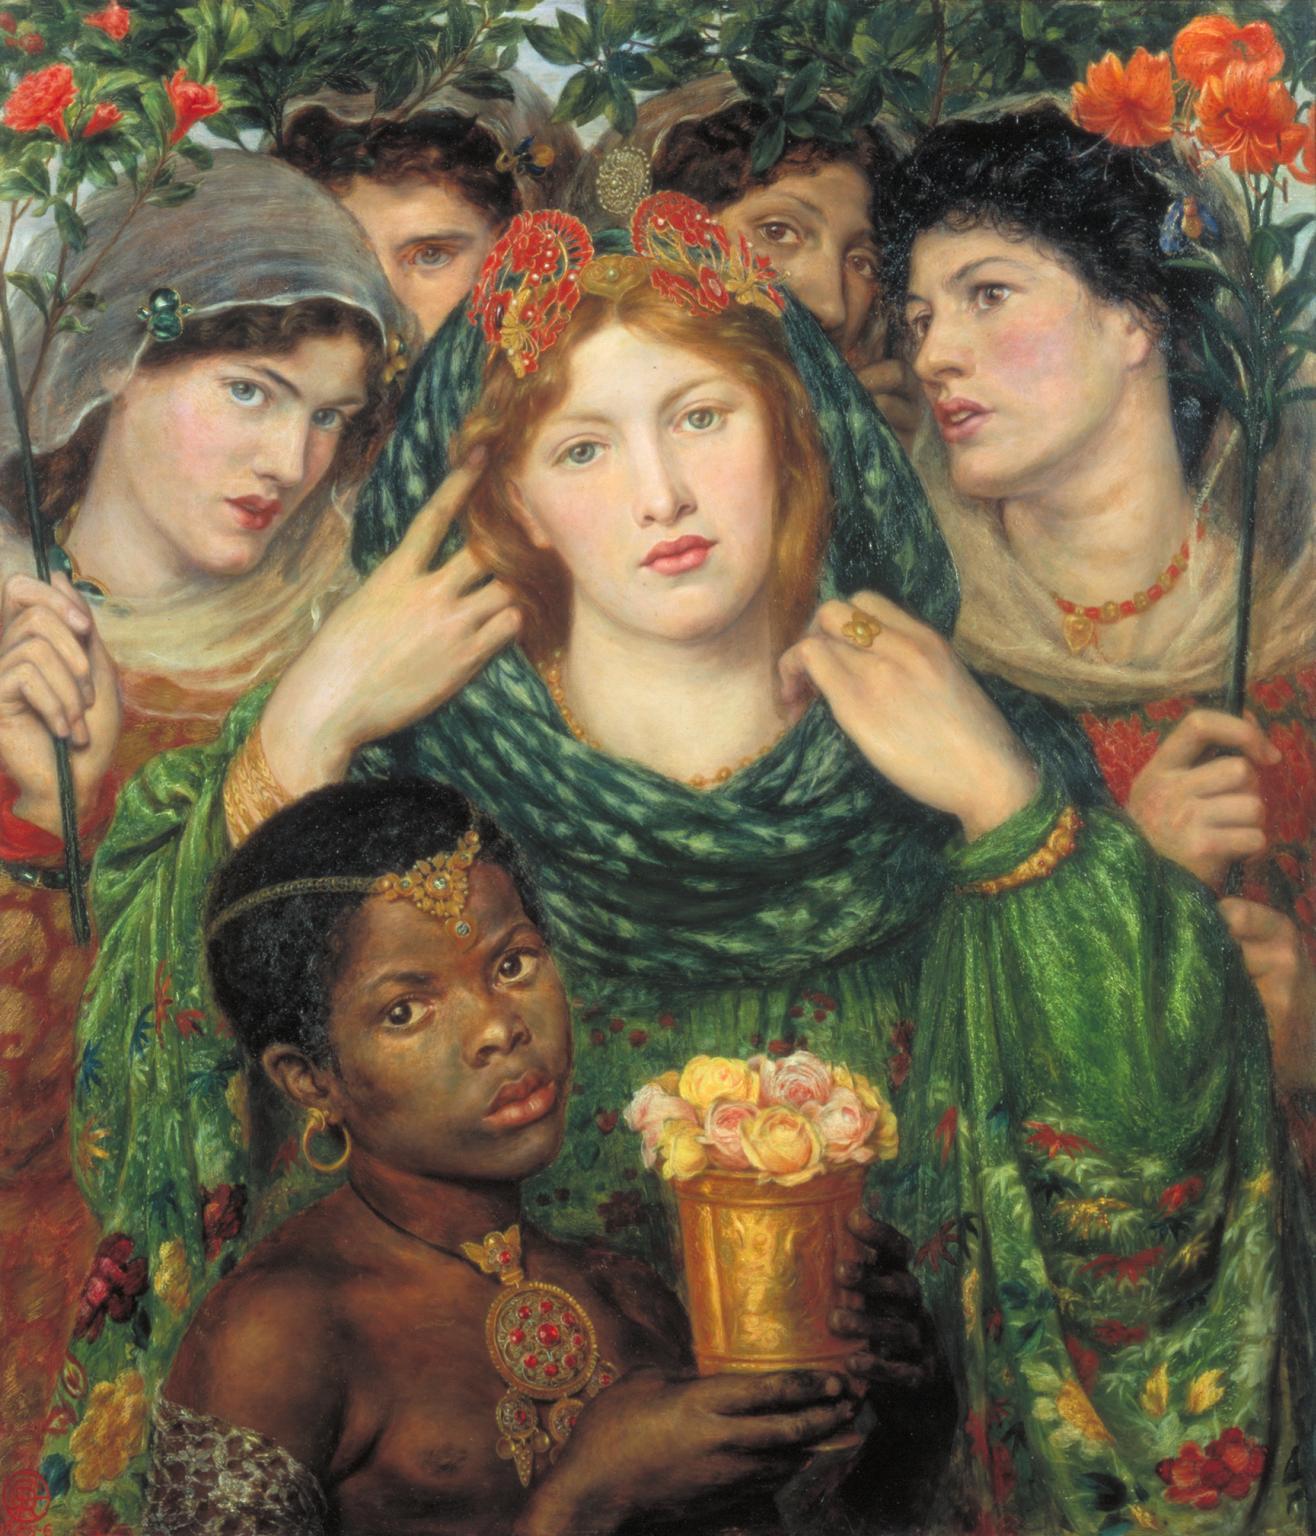 Dante Gabriel Rossetti, The Beloved ('The Bride'), 1865-6. Purchased with assistance from Sir Arthur Du Cros Bt and Sir Otto Beit KCMG through the Art Fund 1916 Â© Tate